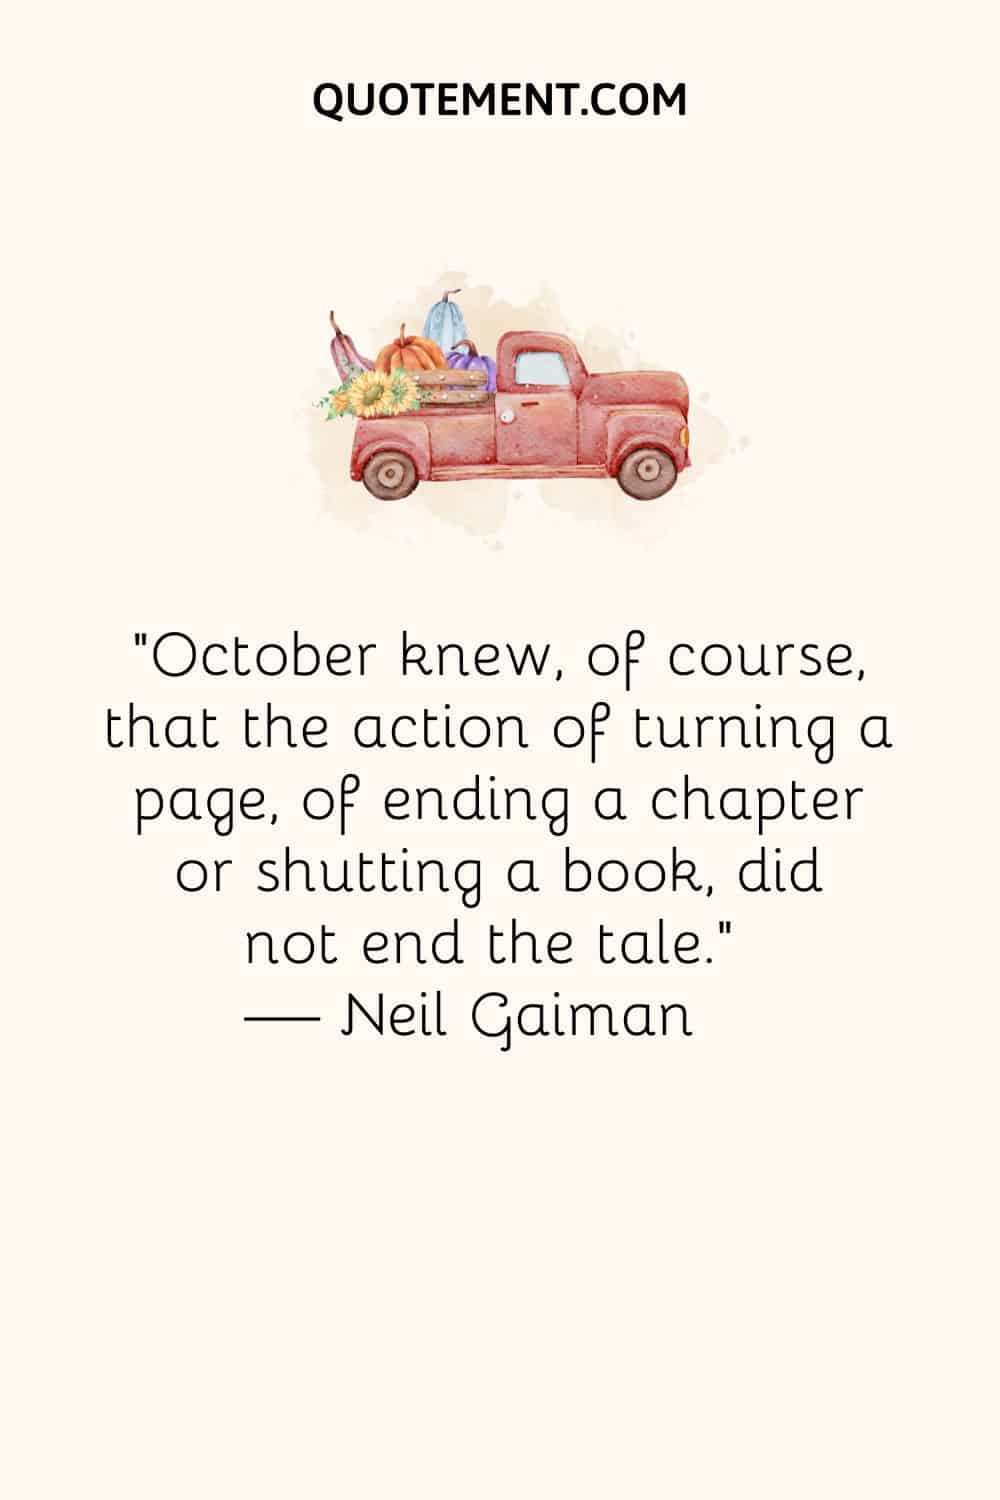 October knew, of course, that the action of turning a page, of ending a chapter or shutting a book, did not end the tale